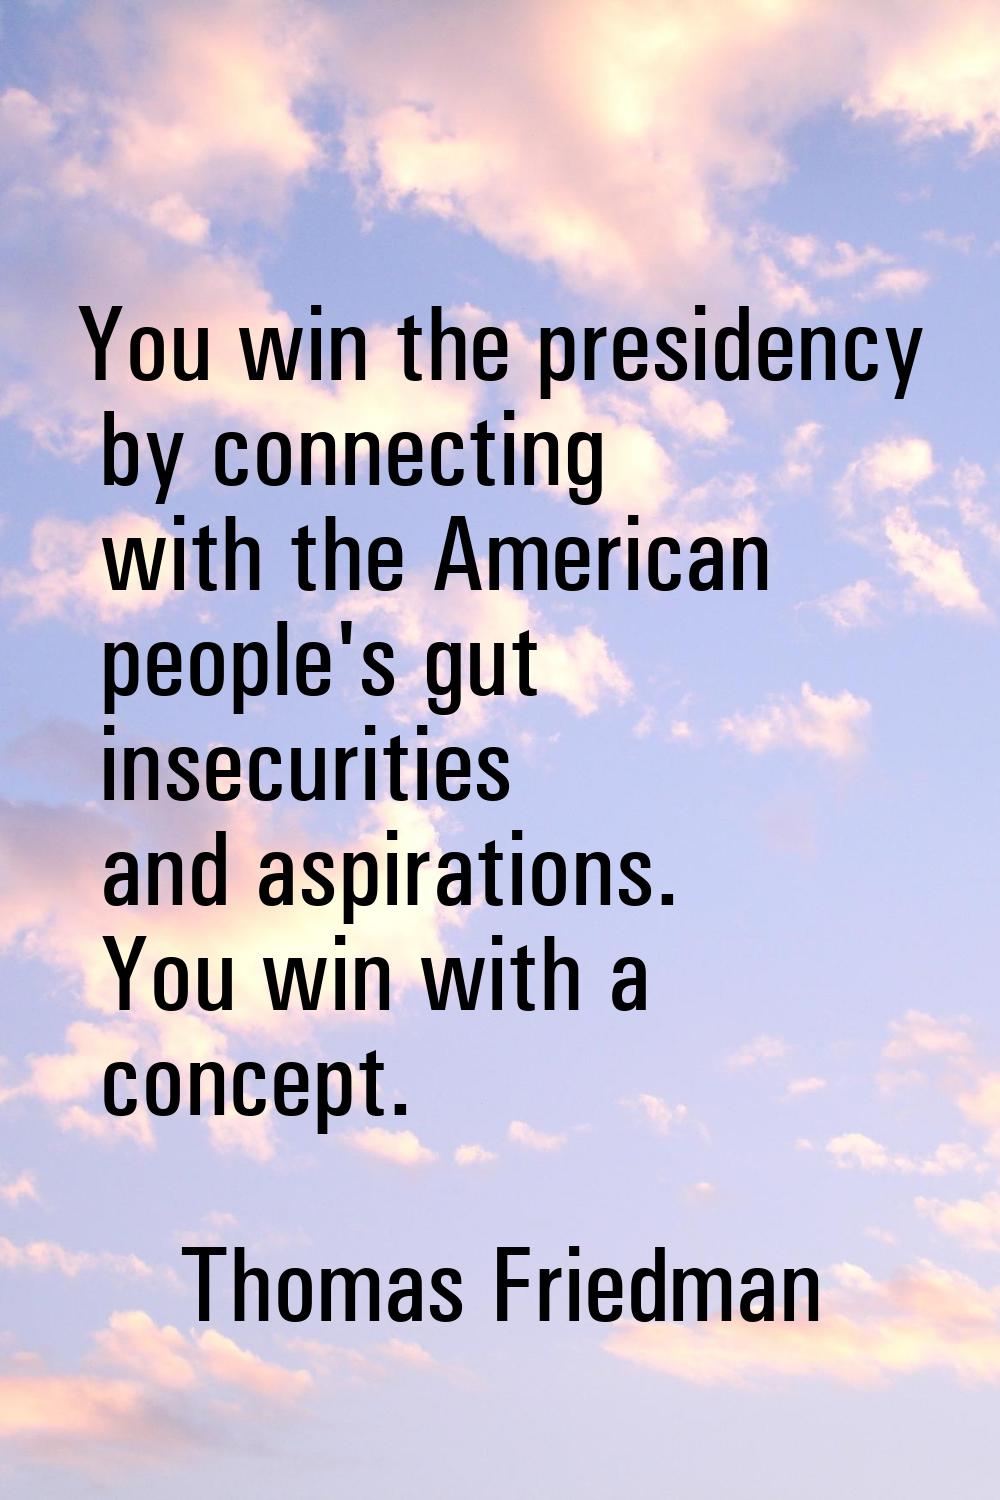 You win the presidency by connecting with the American people's gut insecurities and aspirations. Y